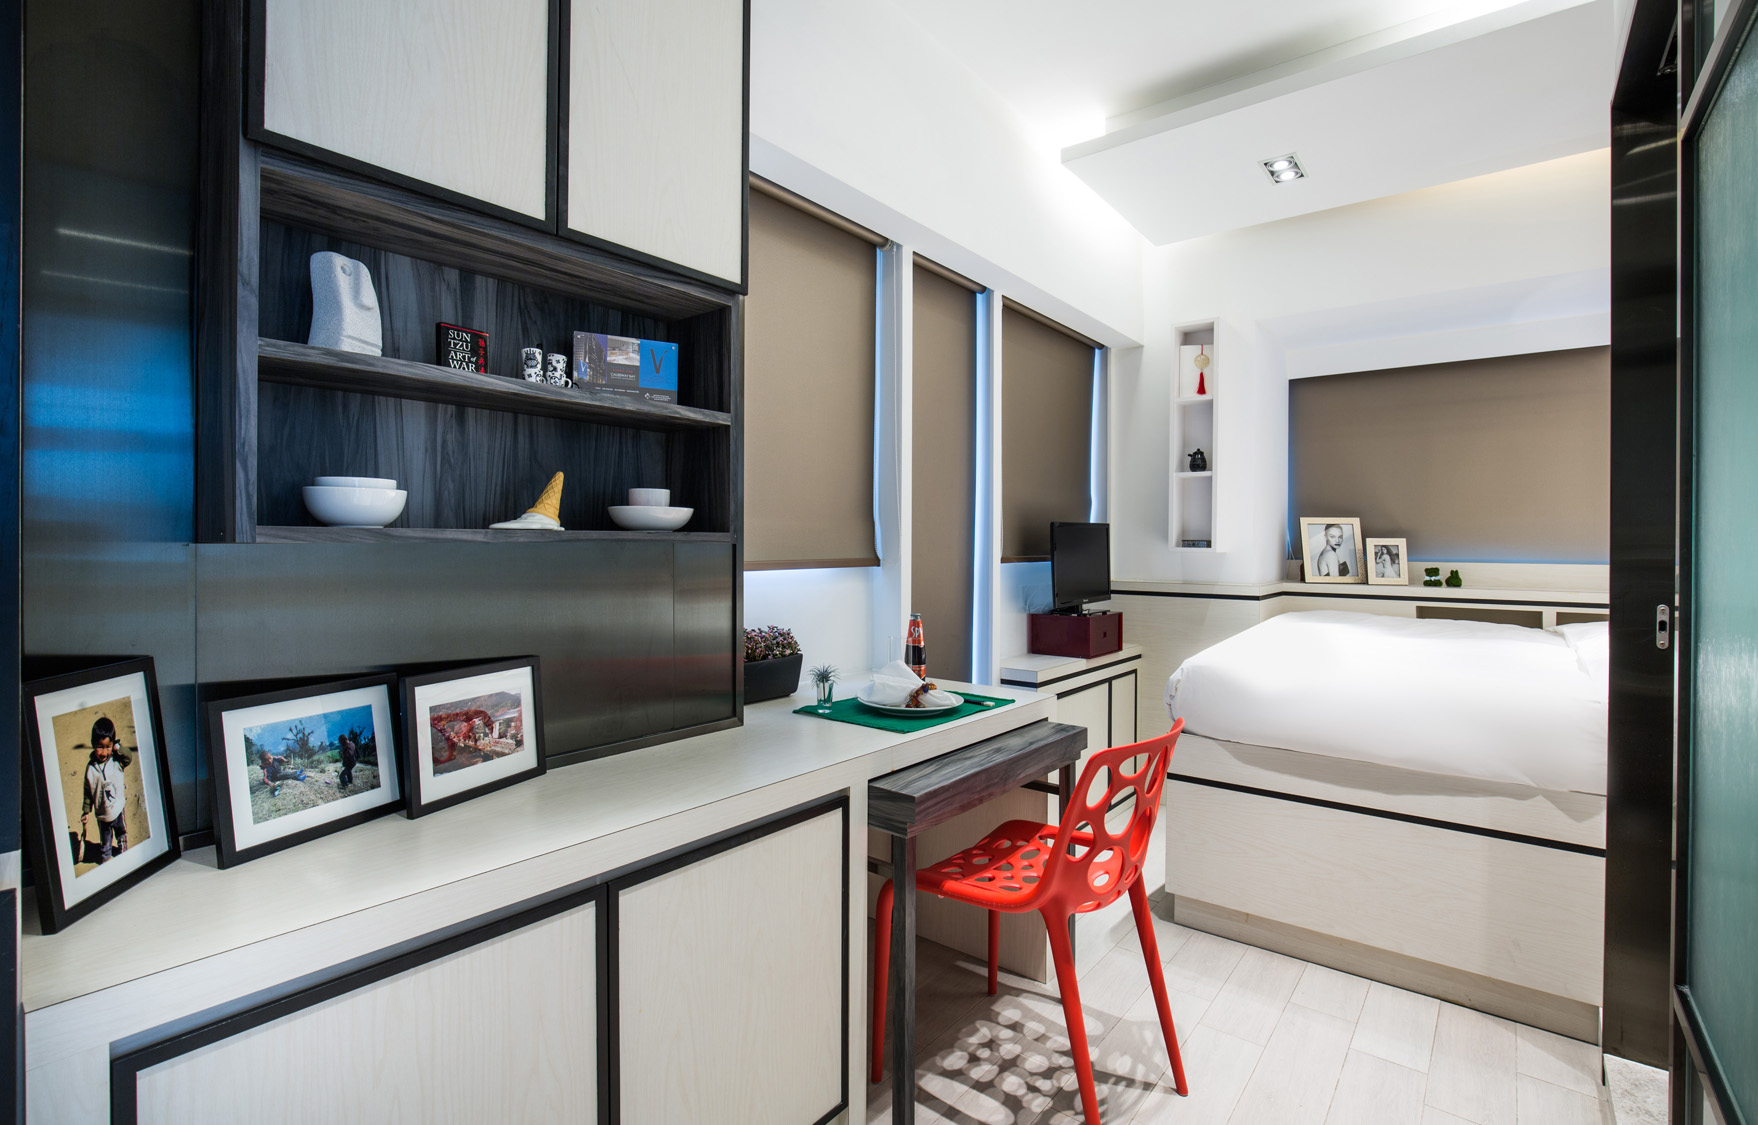 Studio at The Lodge by V serviced apartment in West Kowloon